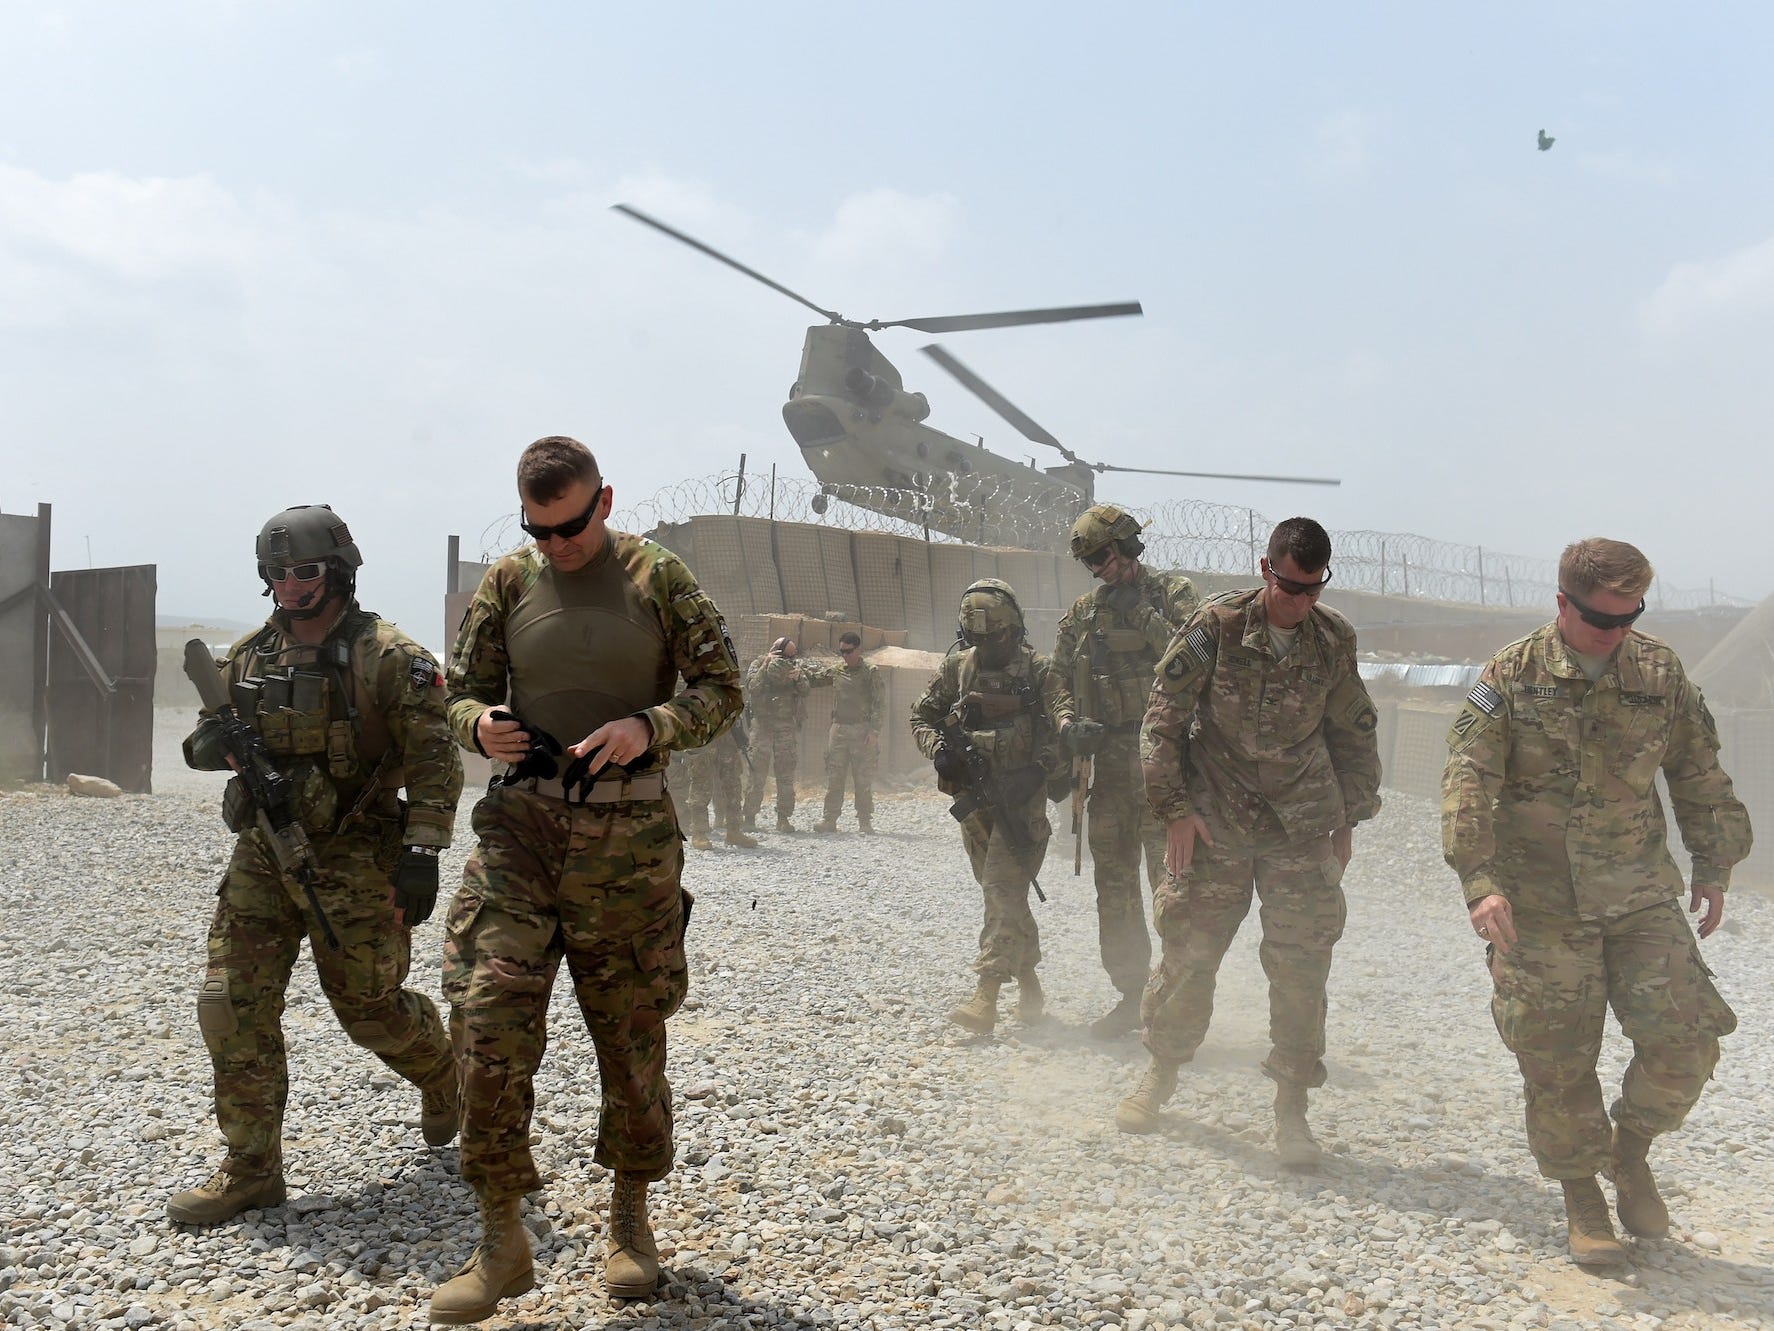 US soldiers Afghanistan stock image 2015